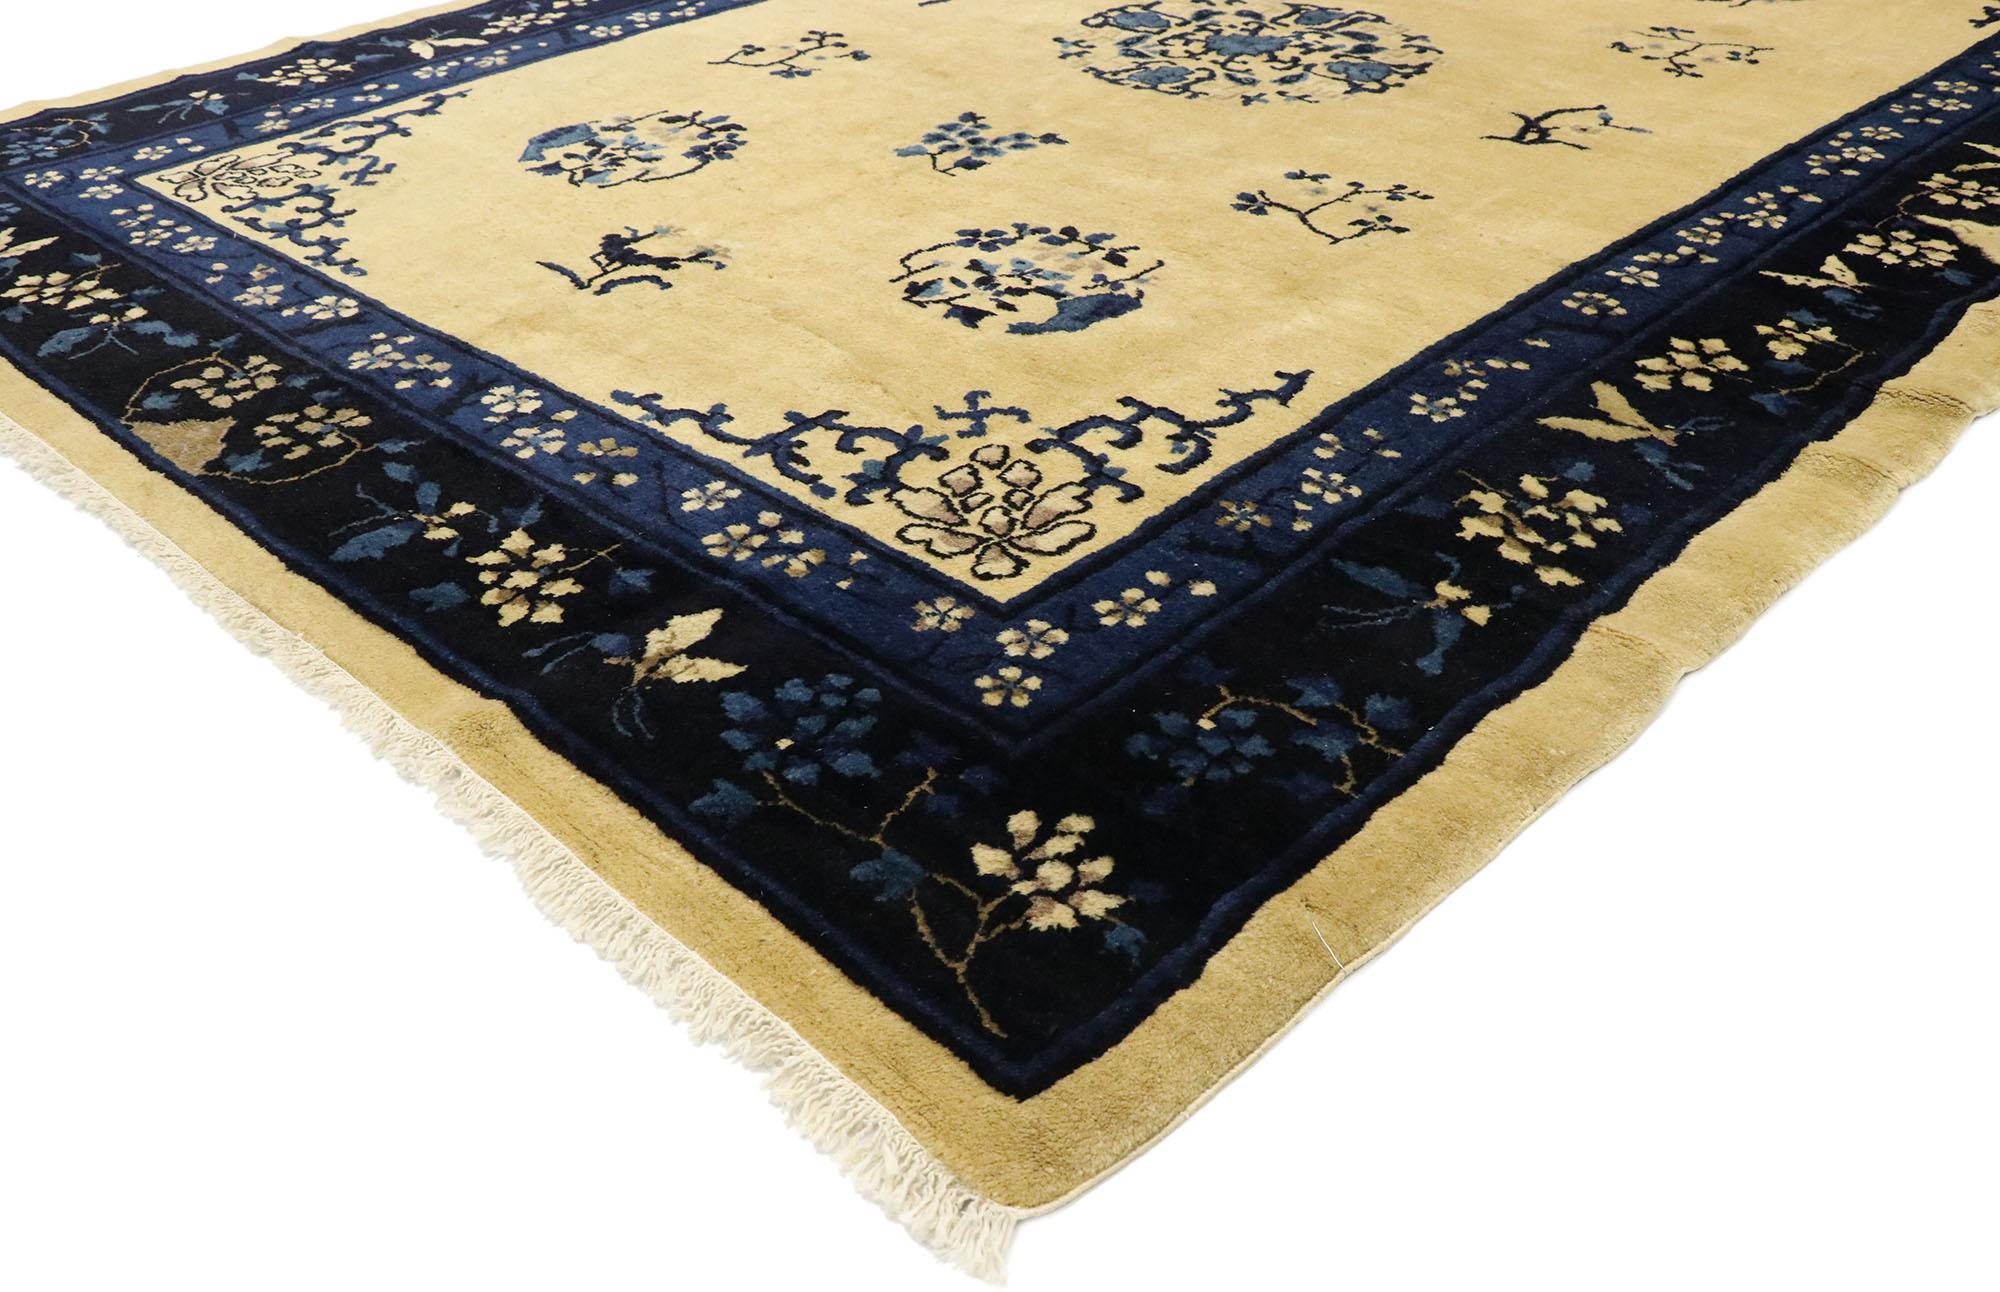 77446 antique Chinese Peking rug with Romantic Chinoiserie style. This hand knotted wool antique Chinese Peking rug features a round open center medallion with blooming lotuses across an abrashed ecru field. Bats, peonies, chrysanthemums and leafy